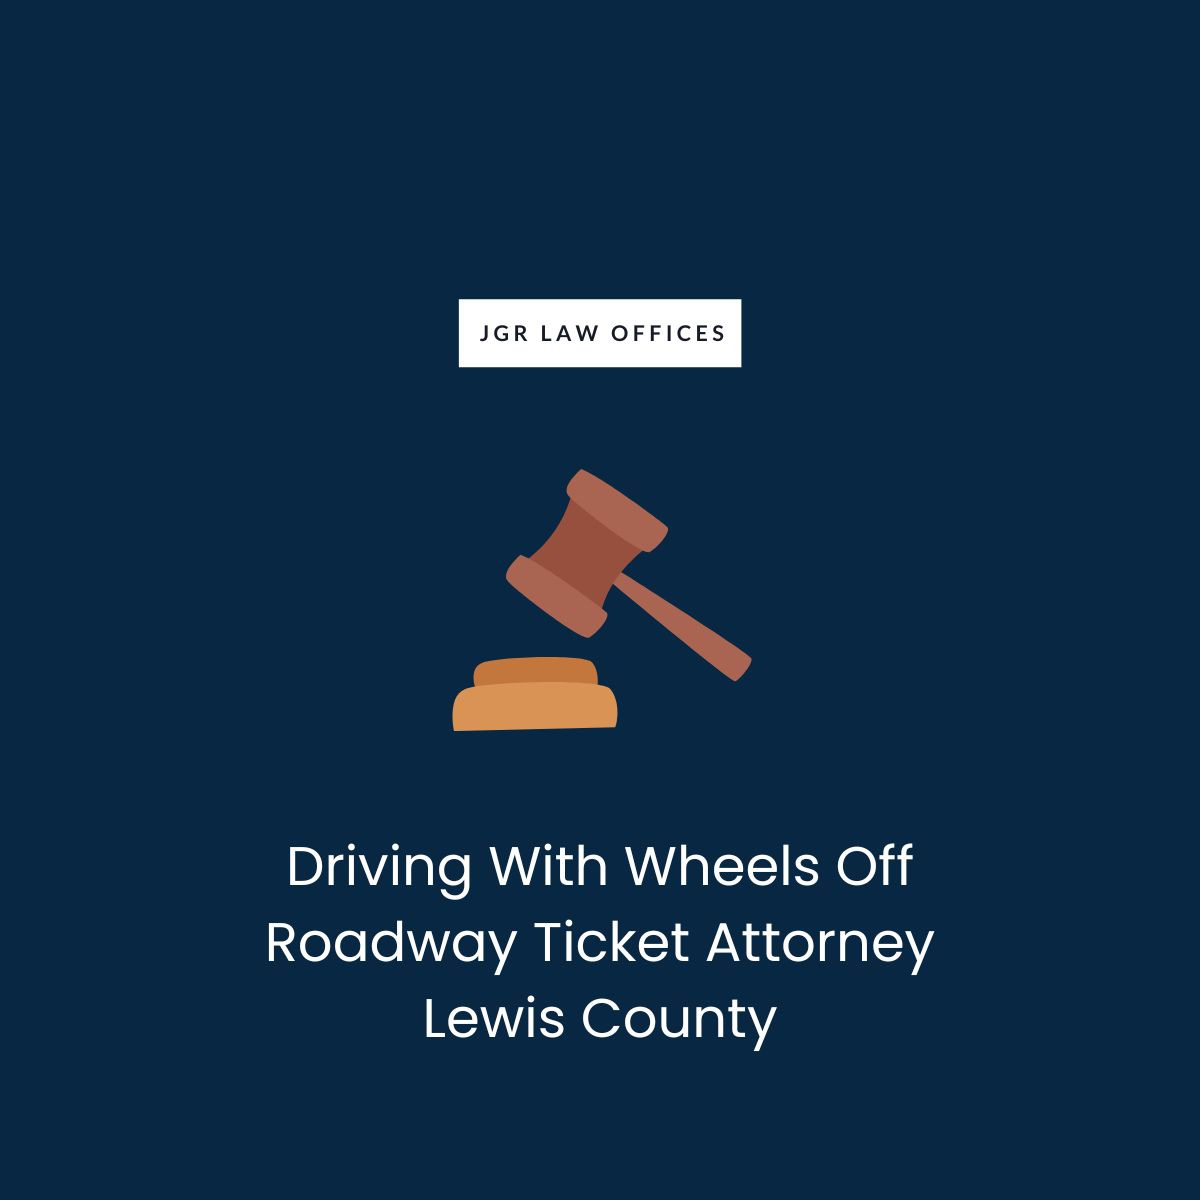 Driving With Wheels Off Roadway Ticket Attorney Lewis County